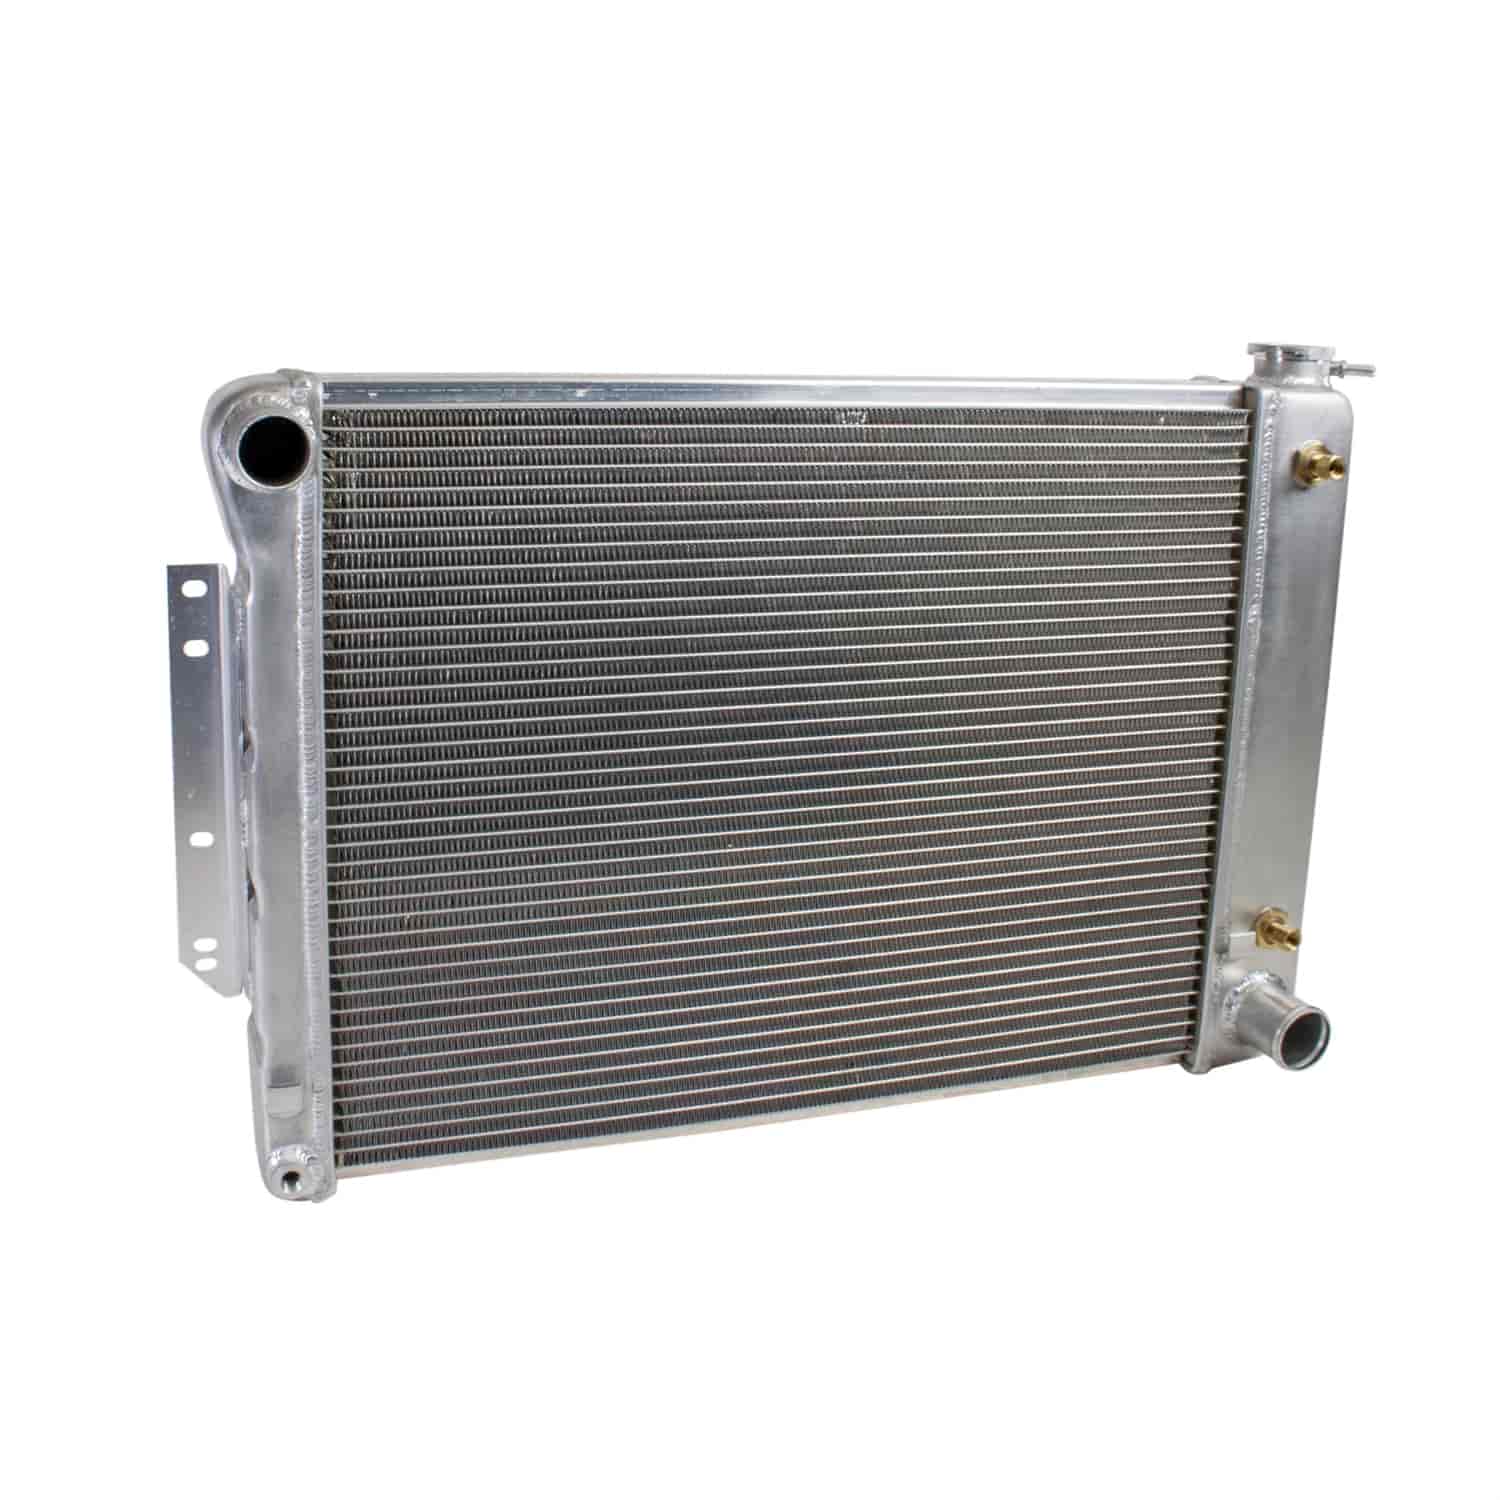 ExactFit Radiator for GM 1967-1969 F Body & 1968-1972 X Body with Transmission Cooler